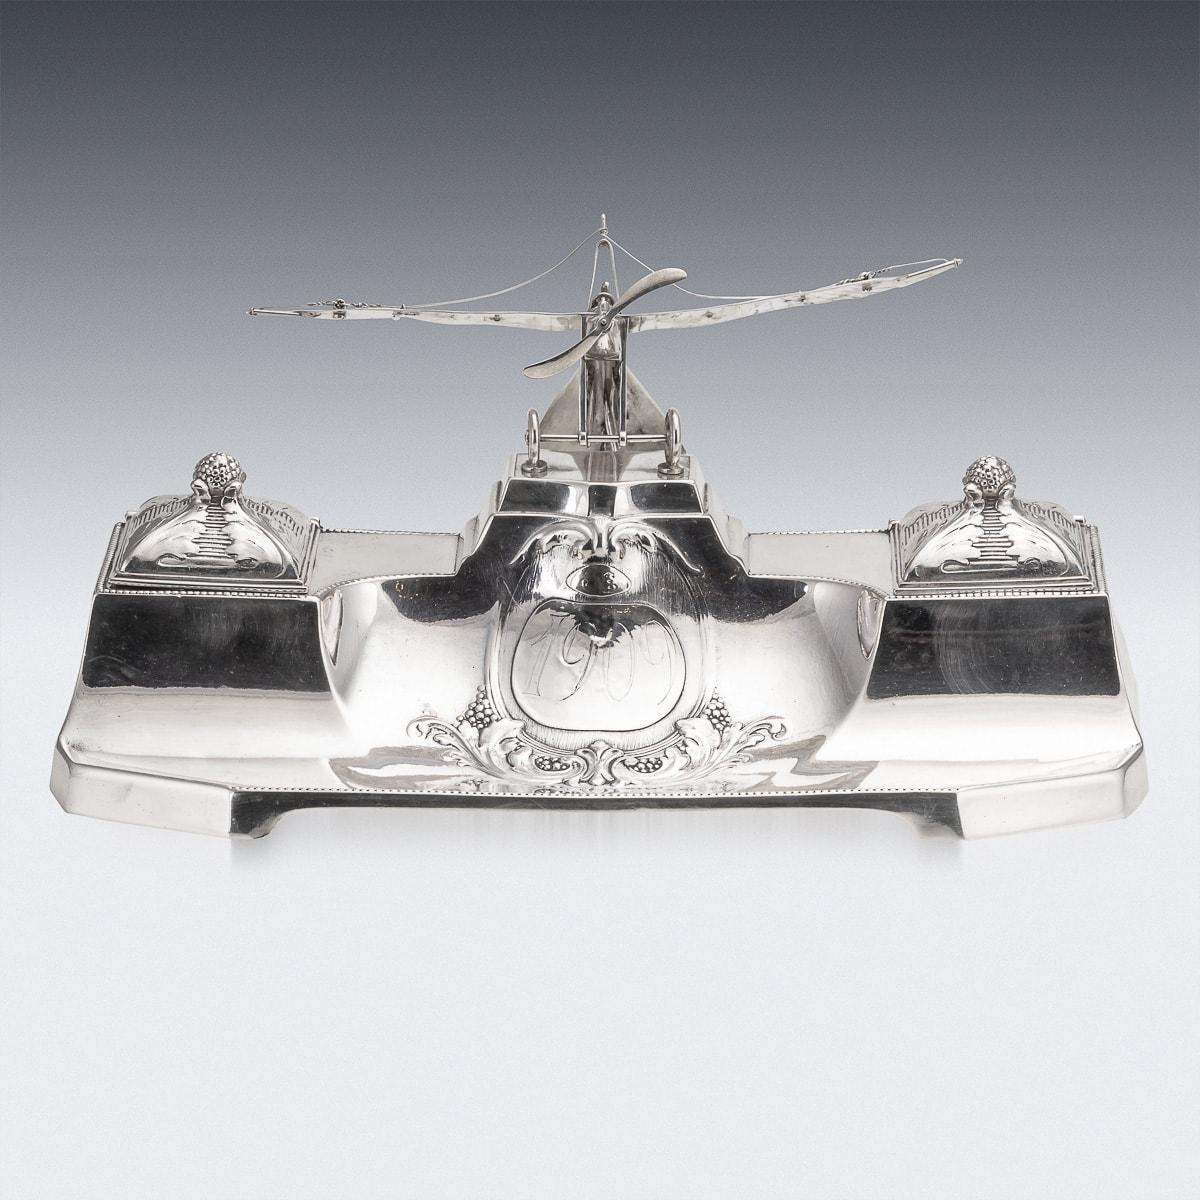 Antique early 20th Century German silver plated inkwell designed with a propeller plane detailing on top. This item was manufactured in Germany by Württemberg Metal Factory (WMF mark). The top is hinged and opens to reveal two separate glass ink pot